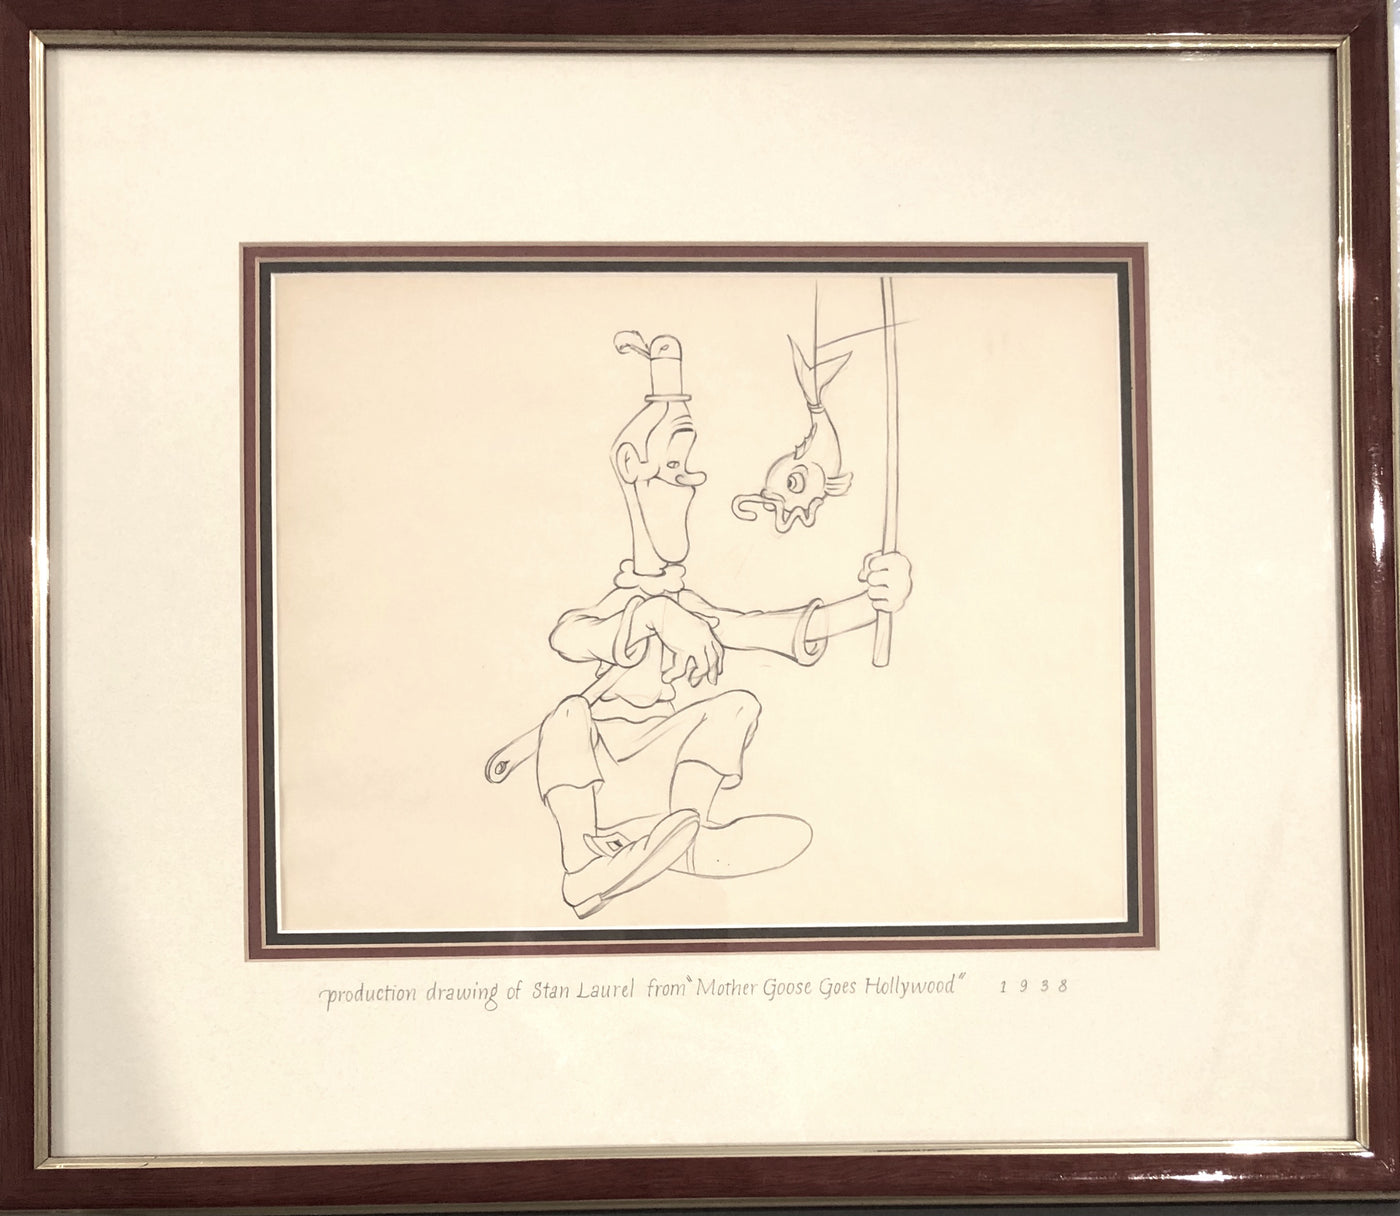 Original Walt Disney Production Drawing featuring Stan Laurel and a Fish from Mother Goose Goes Hollywood (1938)